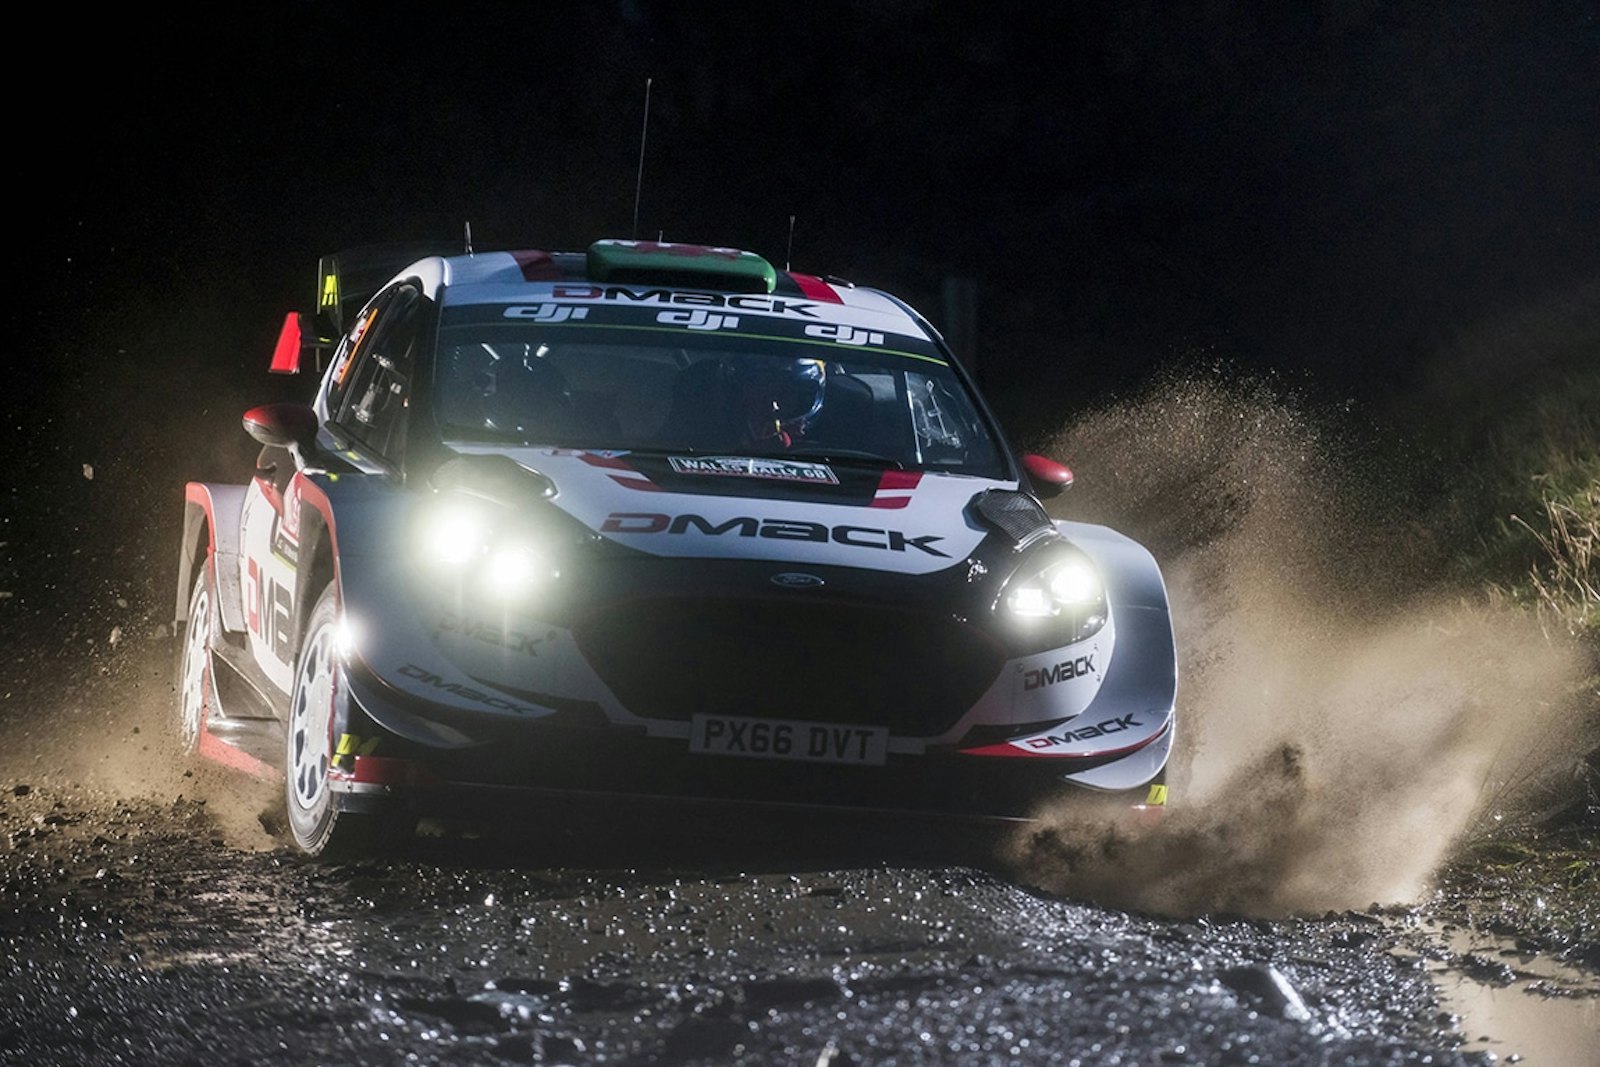 Elfyn Evans (GBR) , Daniel Barrit (GBR) perform during FIA World Rally Championship in Deeside, Great Britain on 26.10.2017 // Jaanus Ree/Red Bull Content Pool // P-20171026-00581 // Usage for editorial use only // Please go to www.redbullcontentpool.com for further information. //